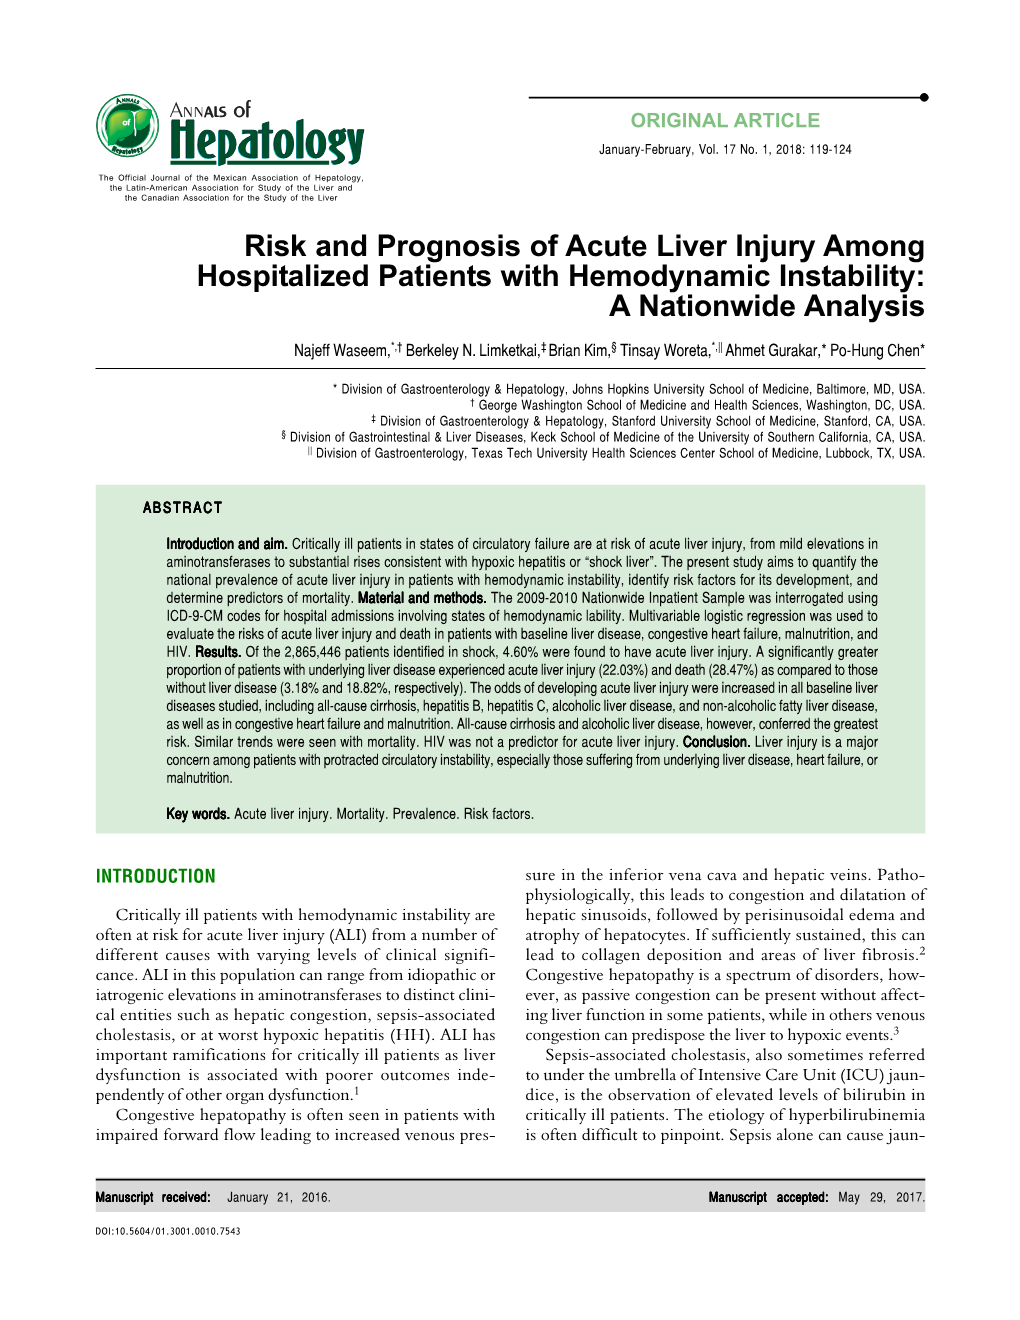 Risk and Prognosis of Acute Liver Injury Among Hospitalized Patients with Hemodynamic Instability: a Nationwide Analysis